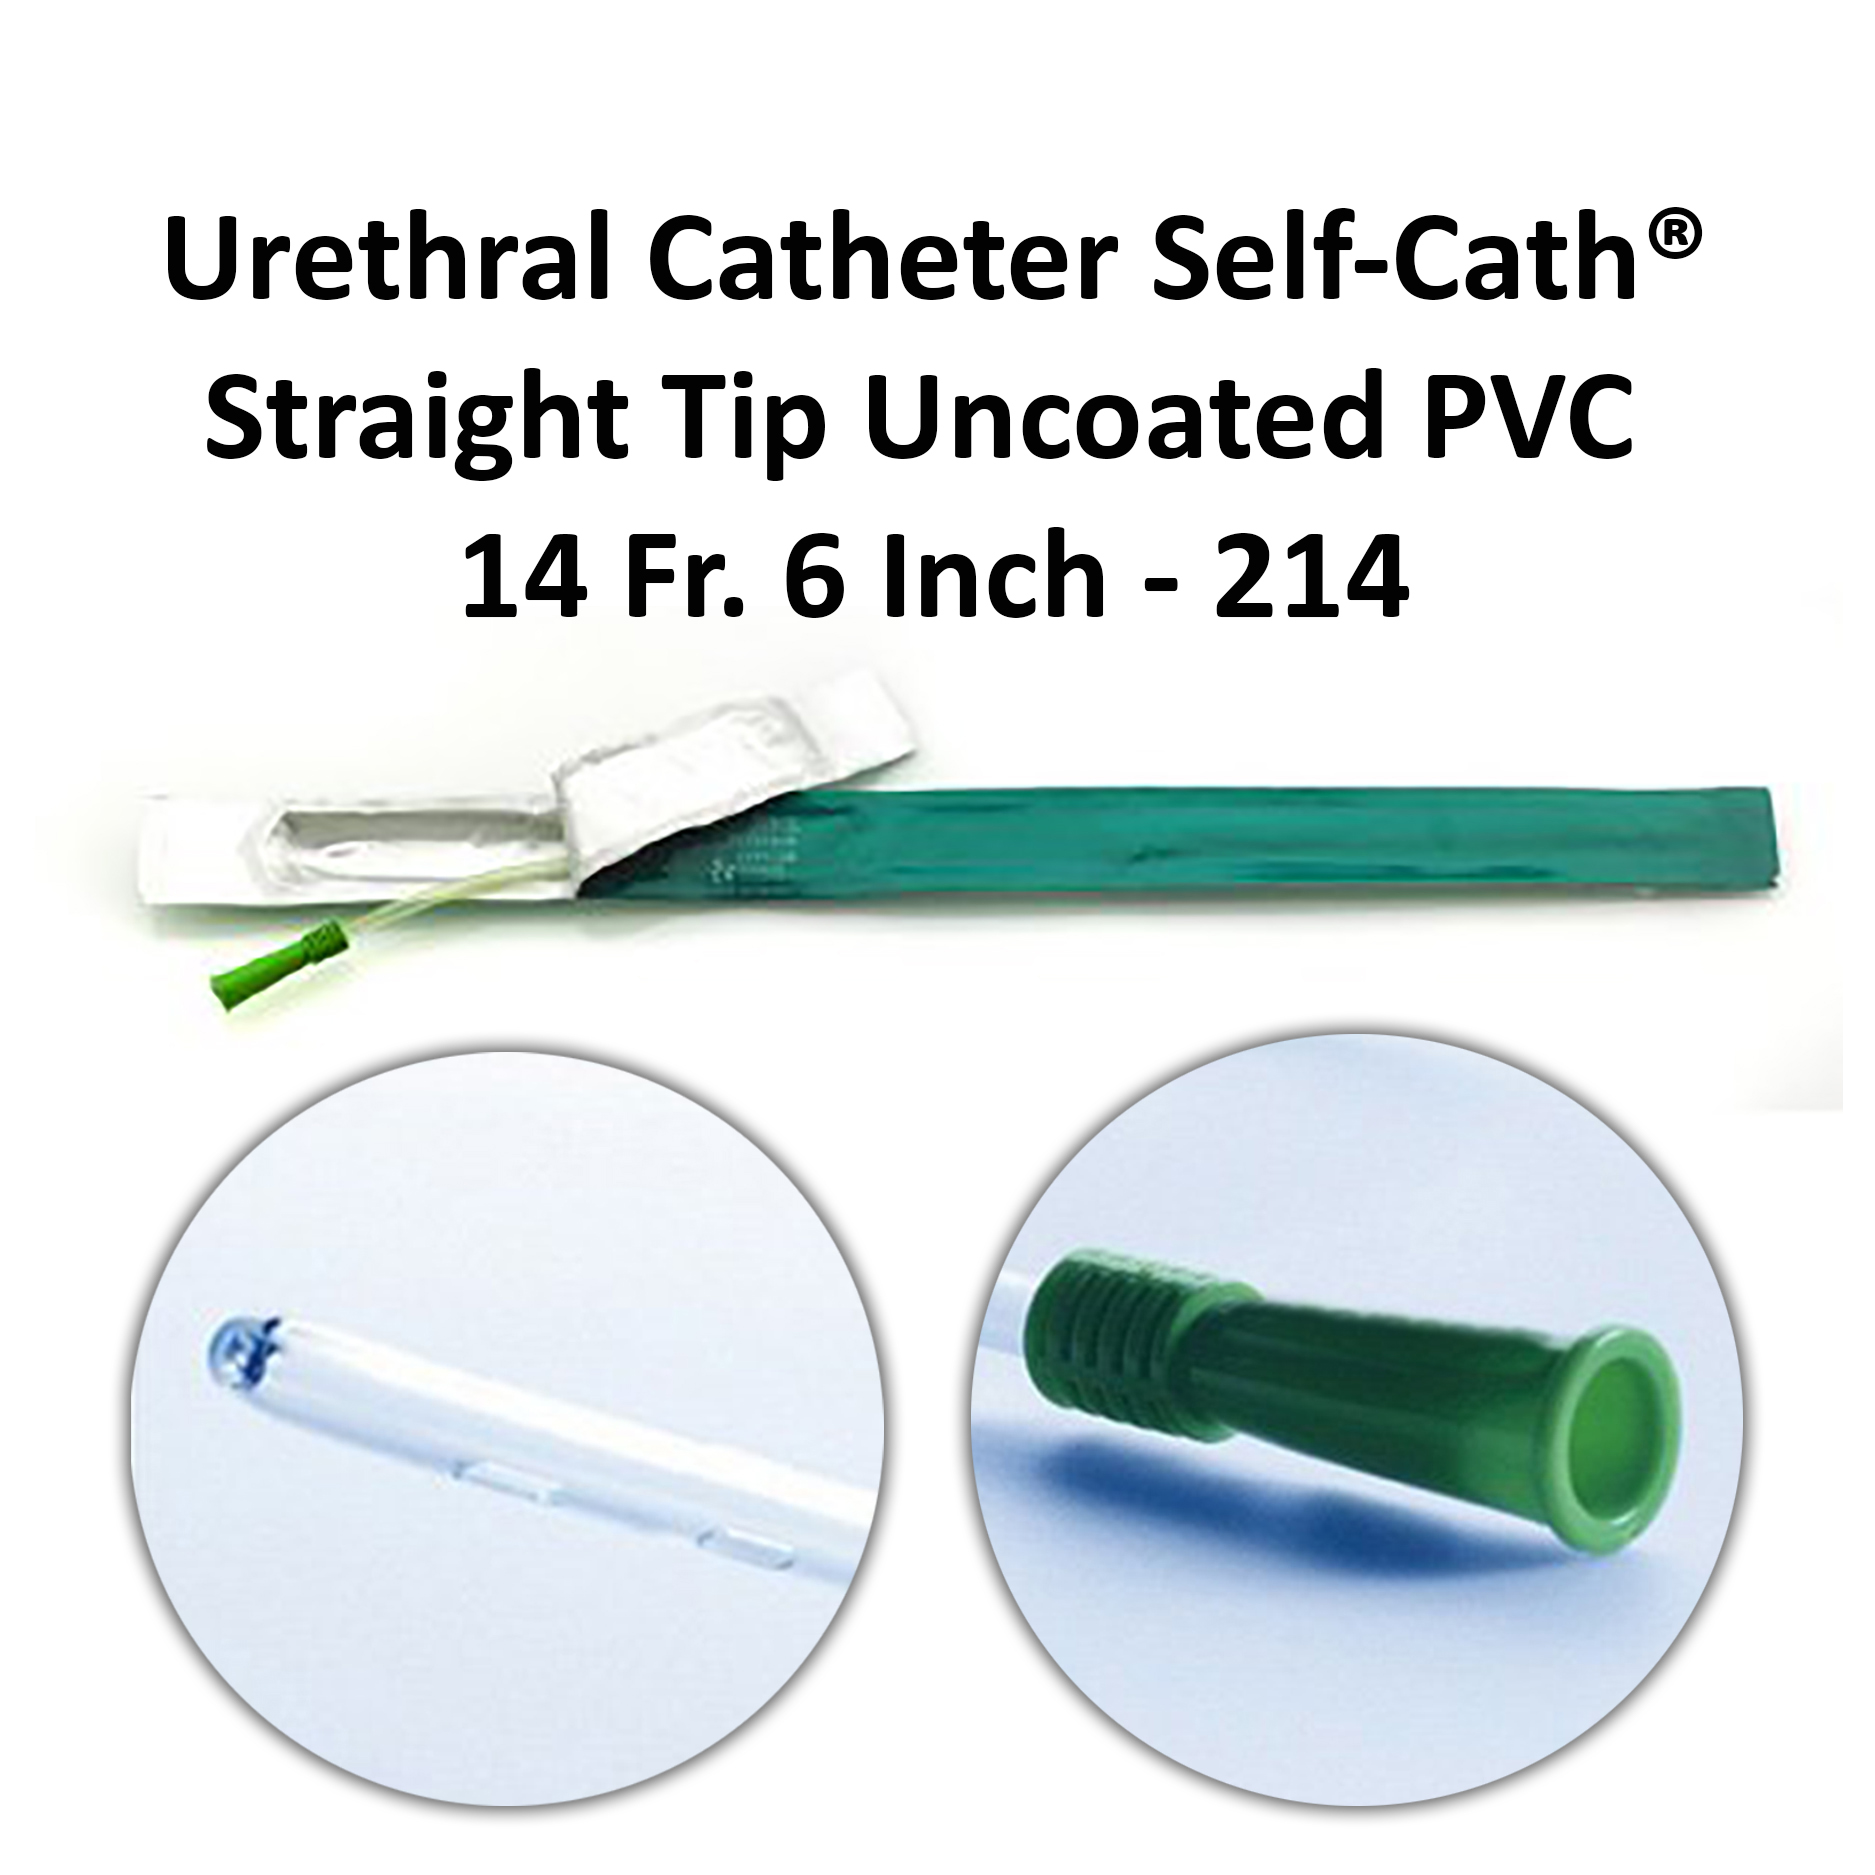 Urethral Catheter Self-Cath® Straight Tip Uncoated PVC 14 Fr. 6 Inch - 214